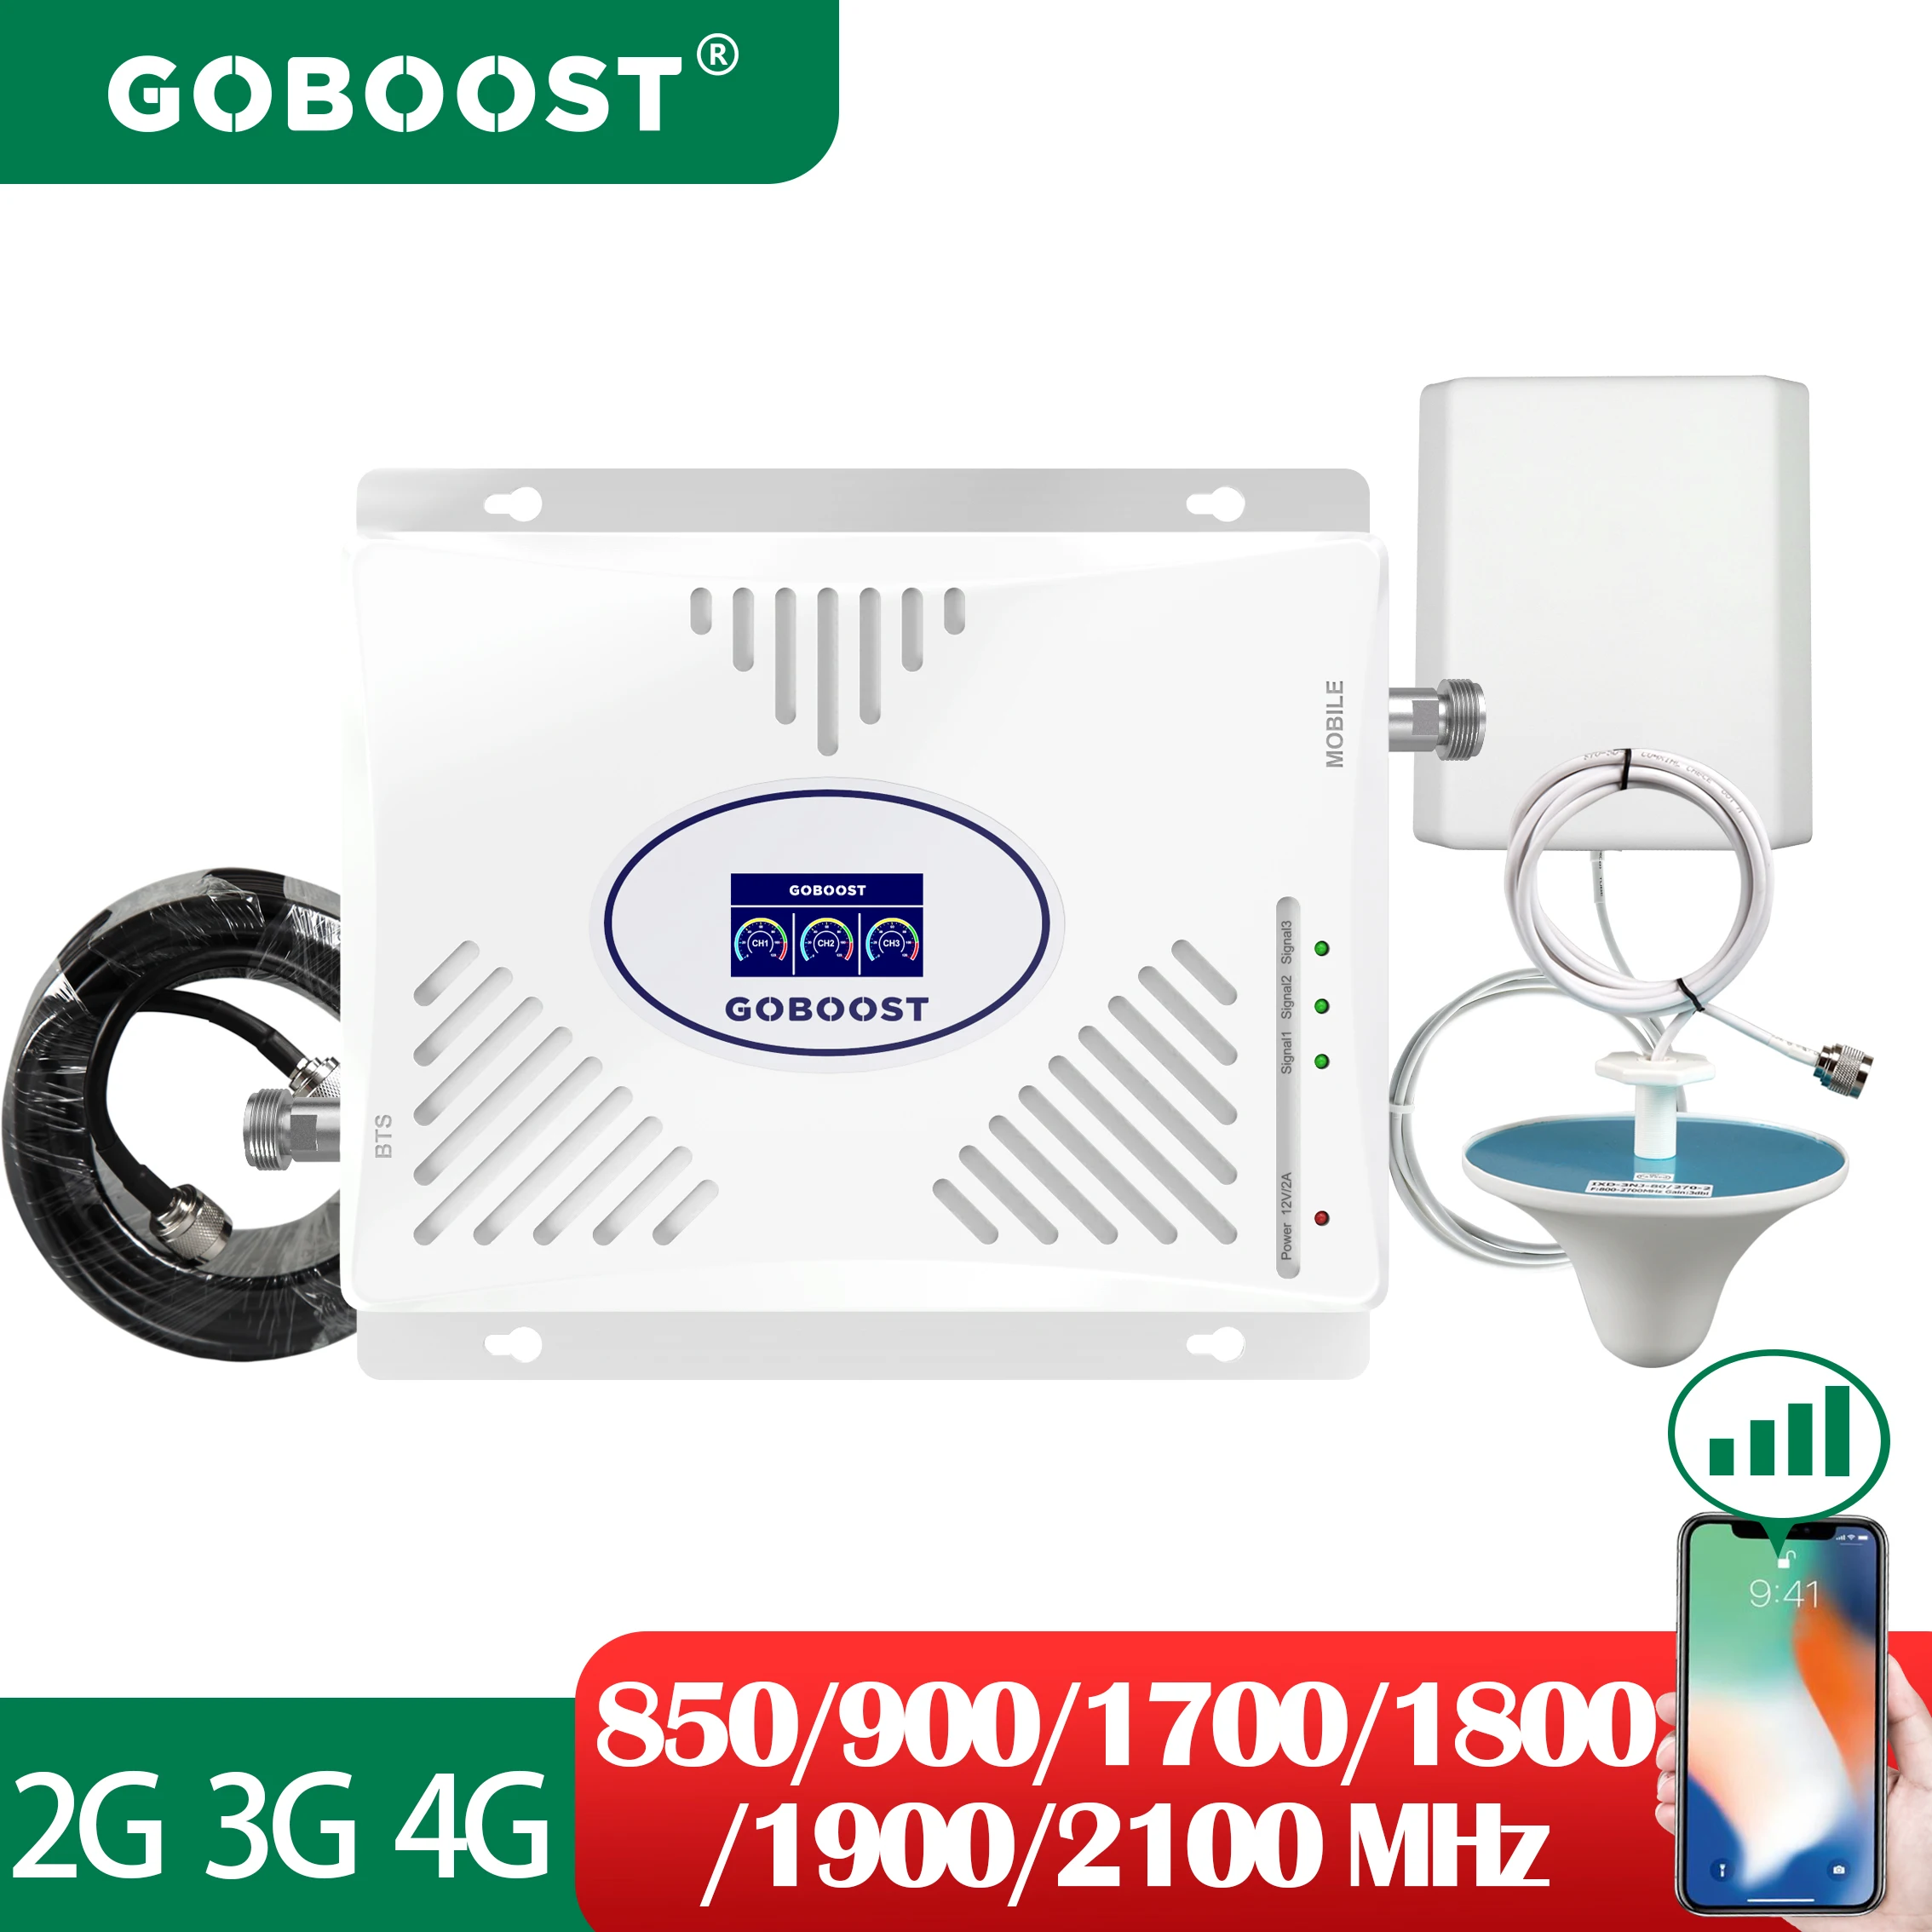 

GOBOOST 3G 4G Signal Booster Tri Band 900 1700 1900 1800 2100Mhz Cellular Repeater GSM WCDMA Dissplay Cell Phone Amplifier Kit